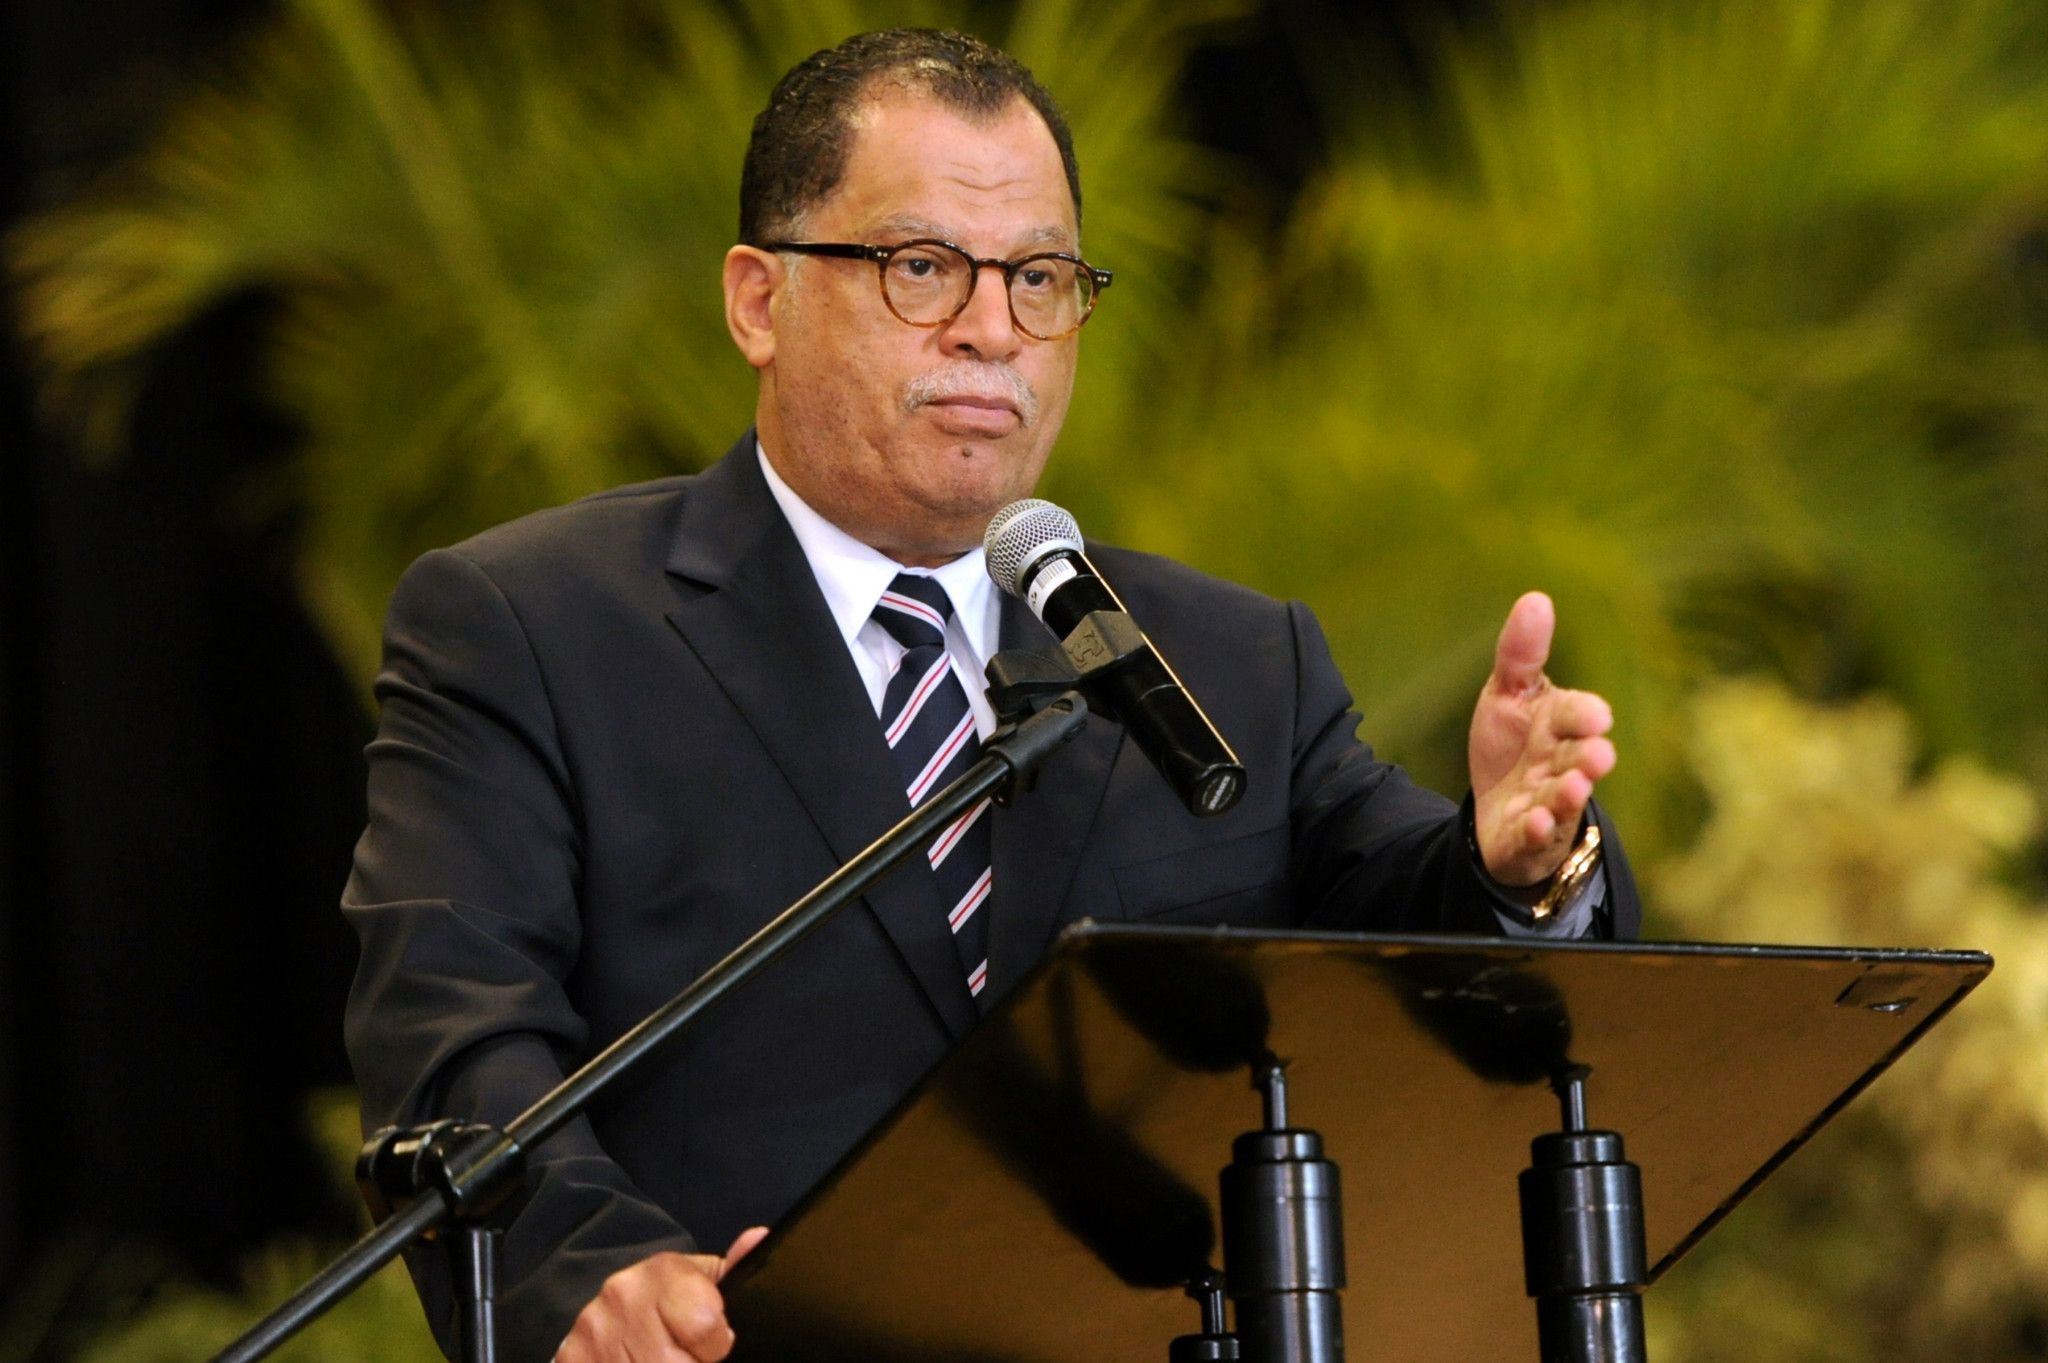 Danny Jordaan has lost his third attempt to be elected to the FIFA Council ©Getty Images